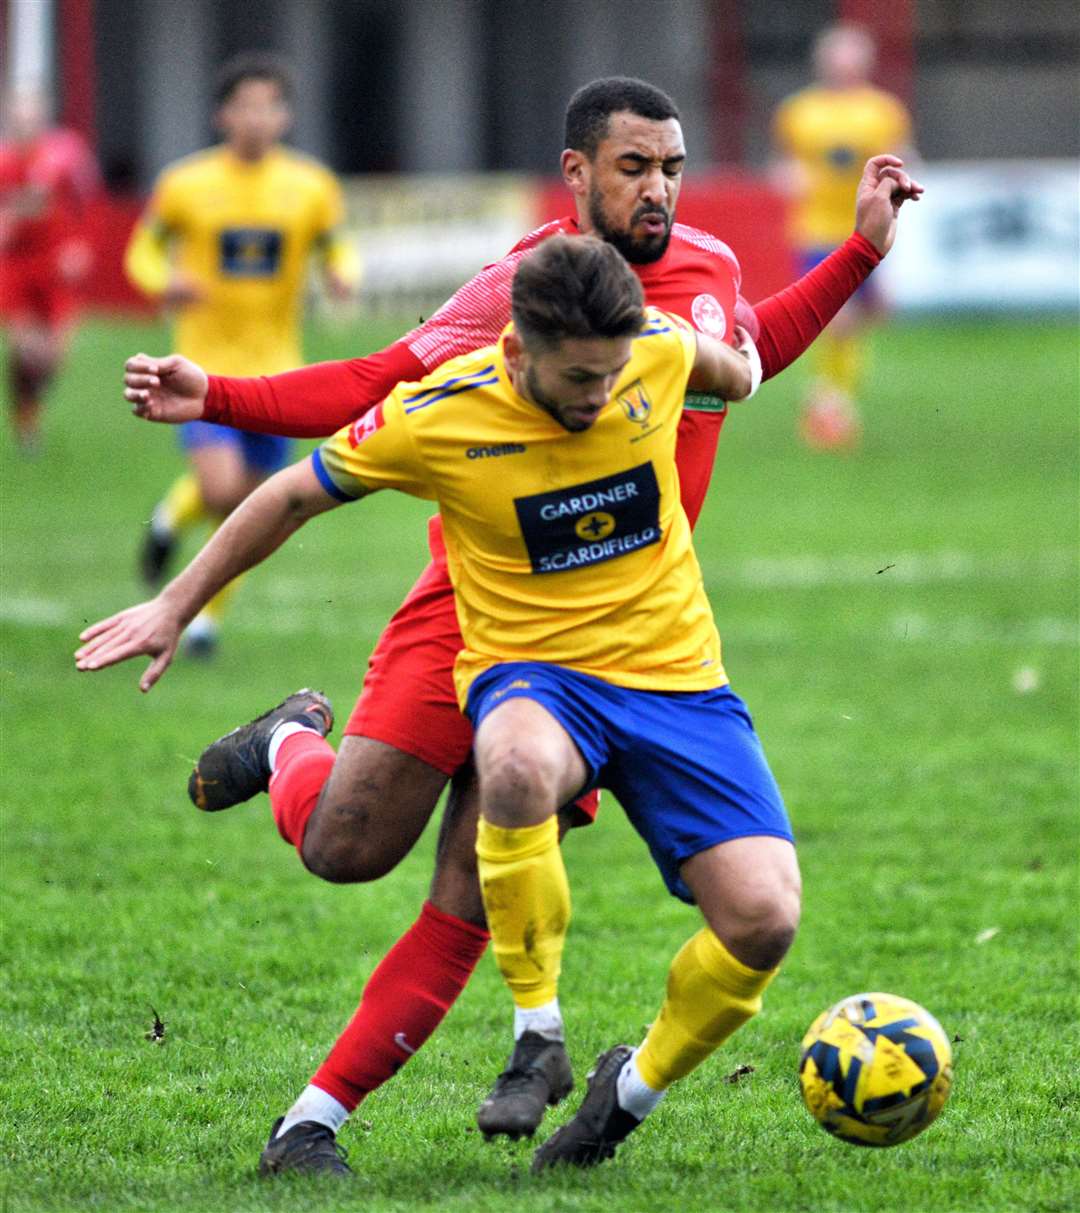 Johan Caney-Bryan scored Hythe's third against Lancing. Picture: Randolph File